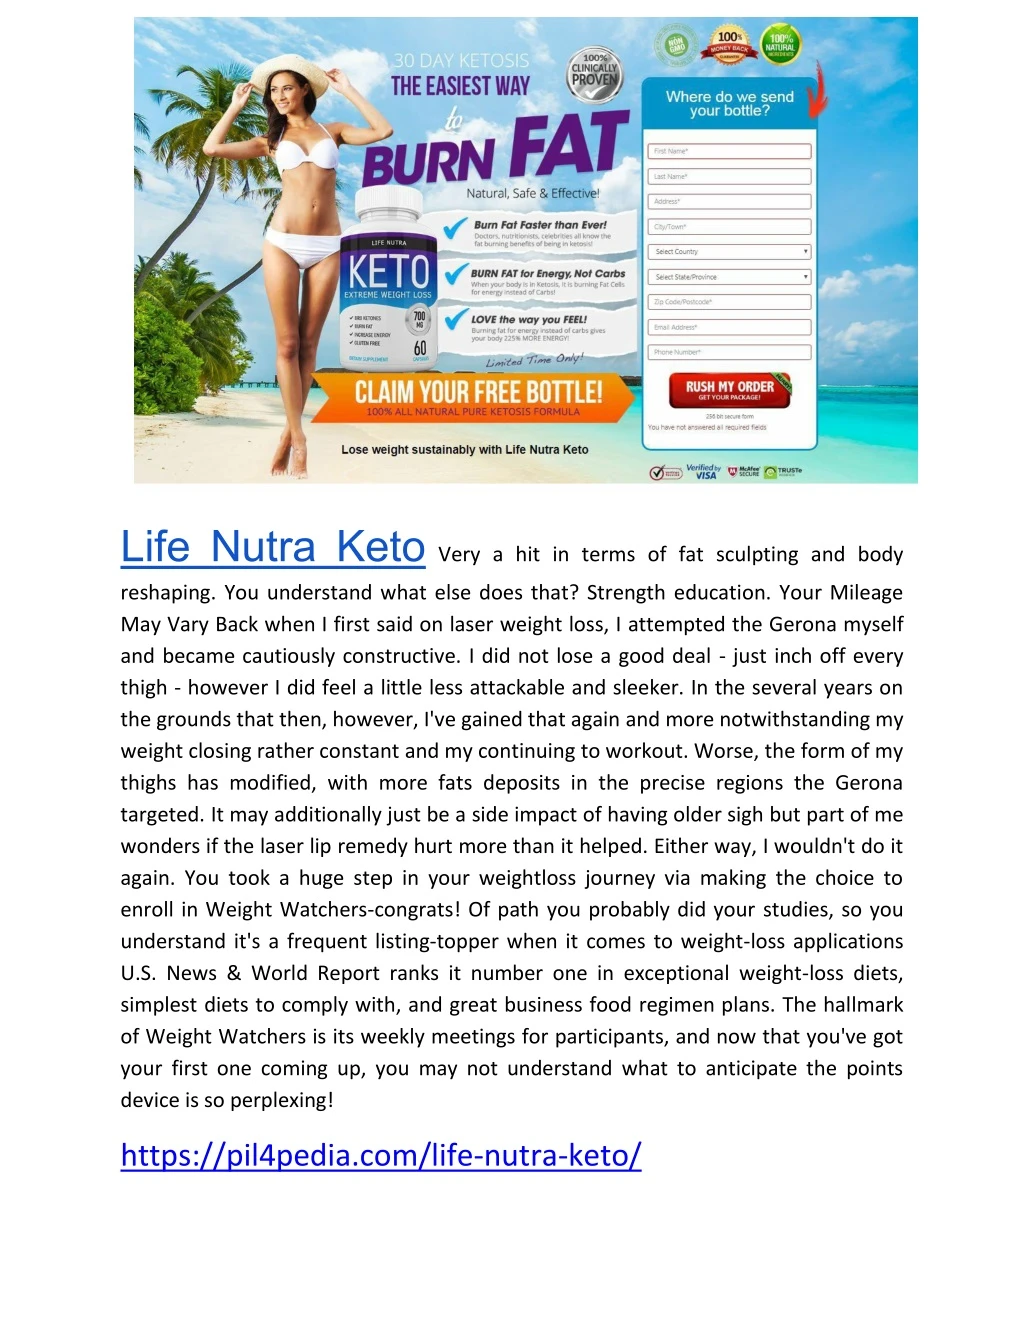 life nutra keto very a hit in terms